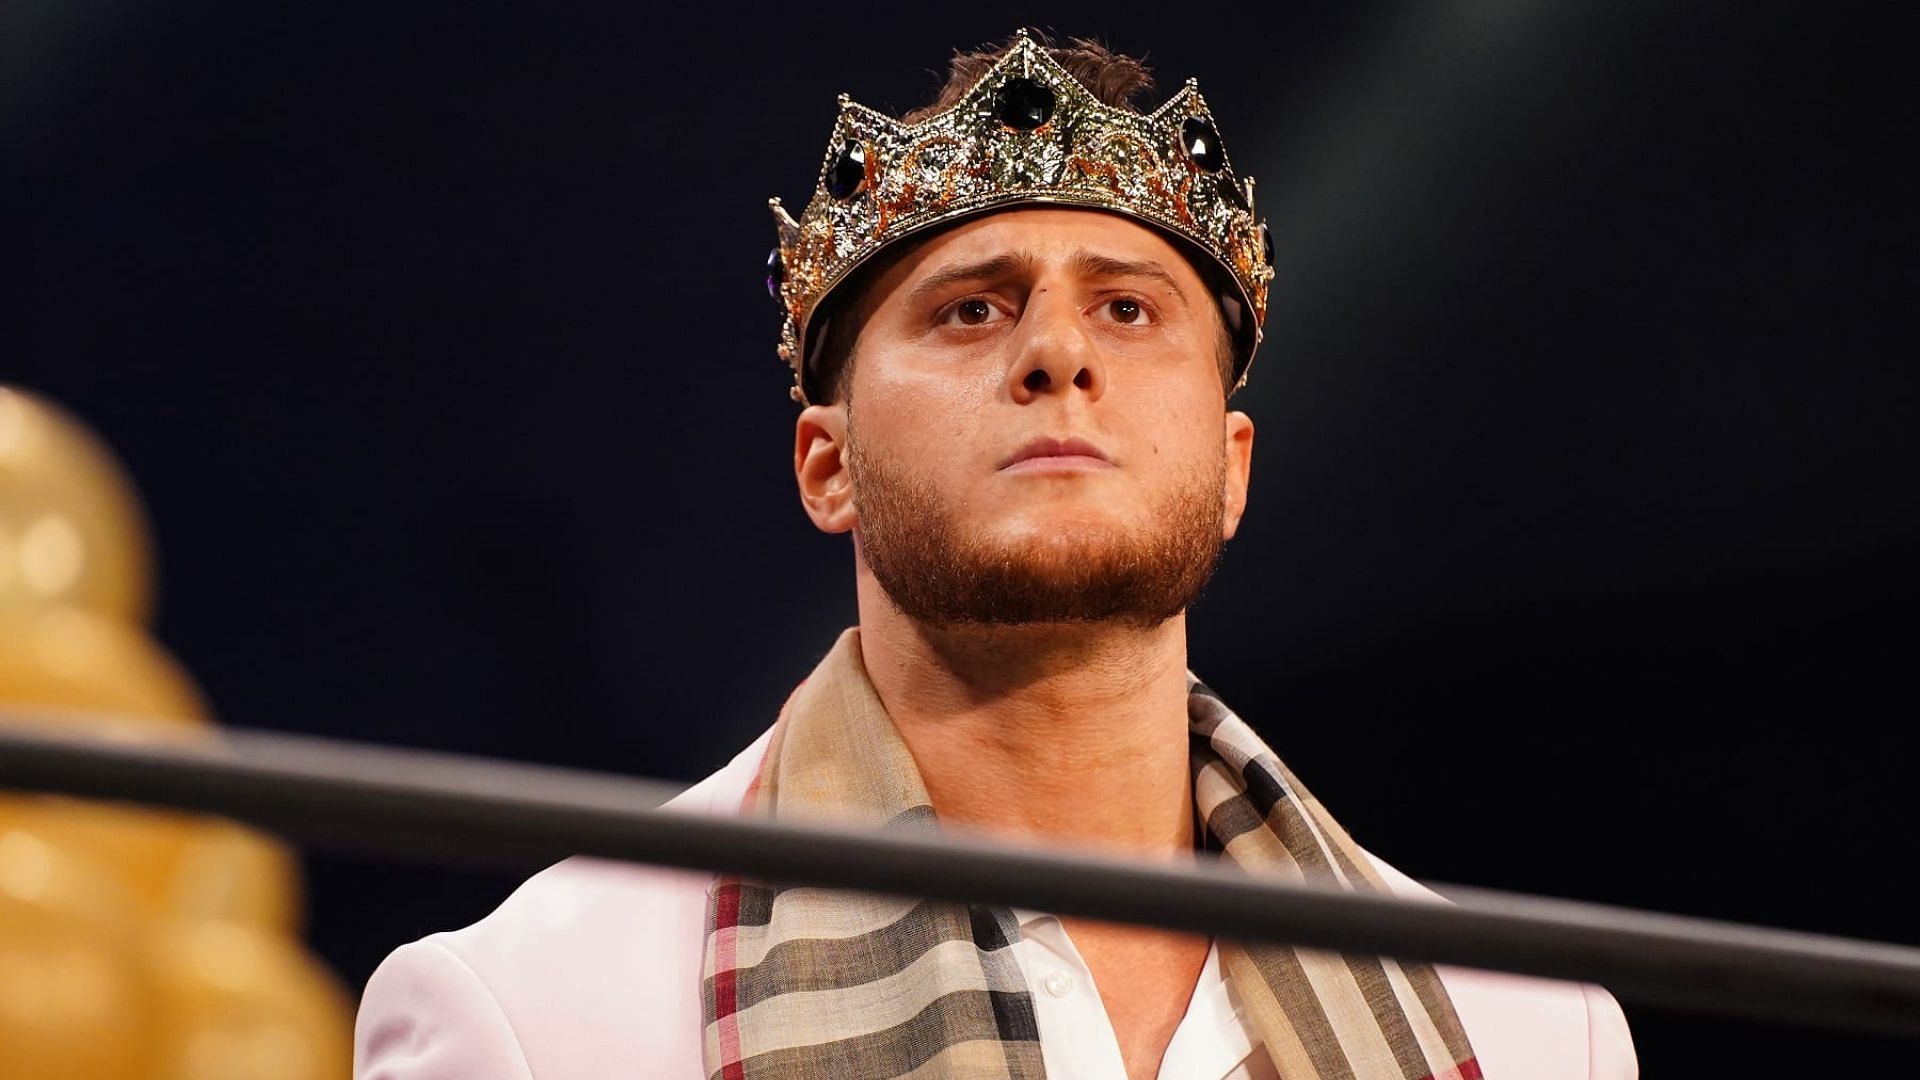 Has MJF become the greatest AEW star in history?